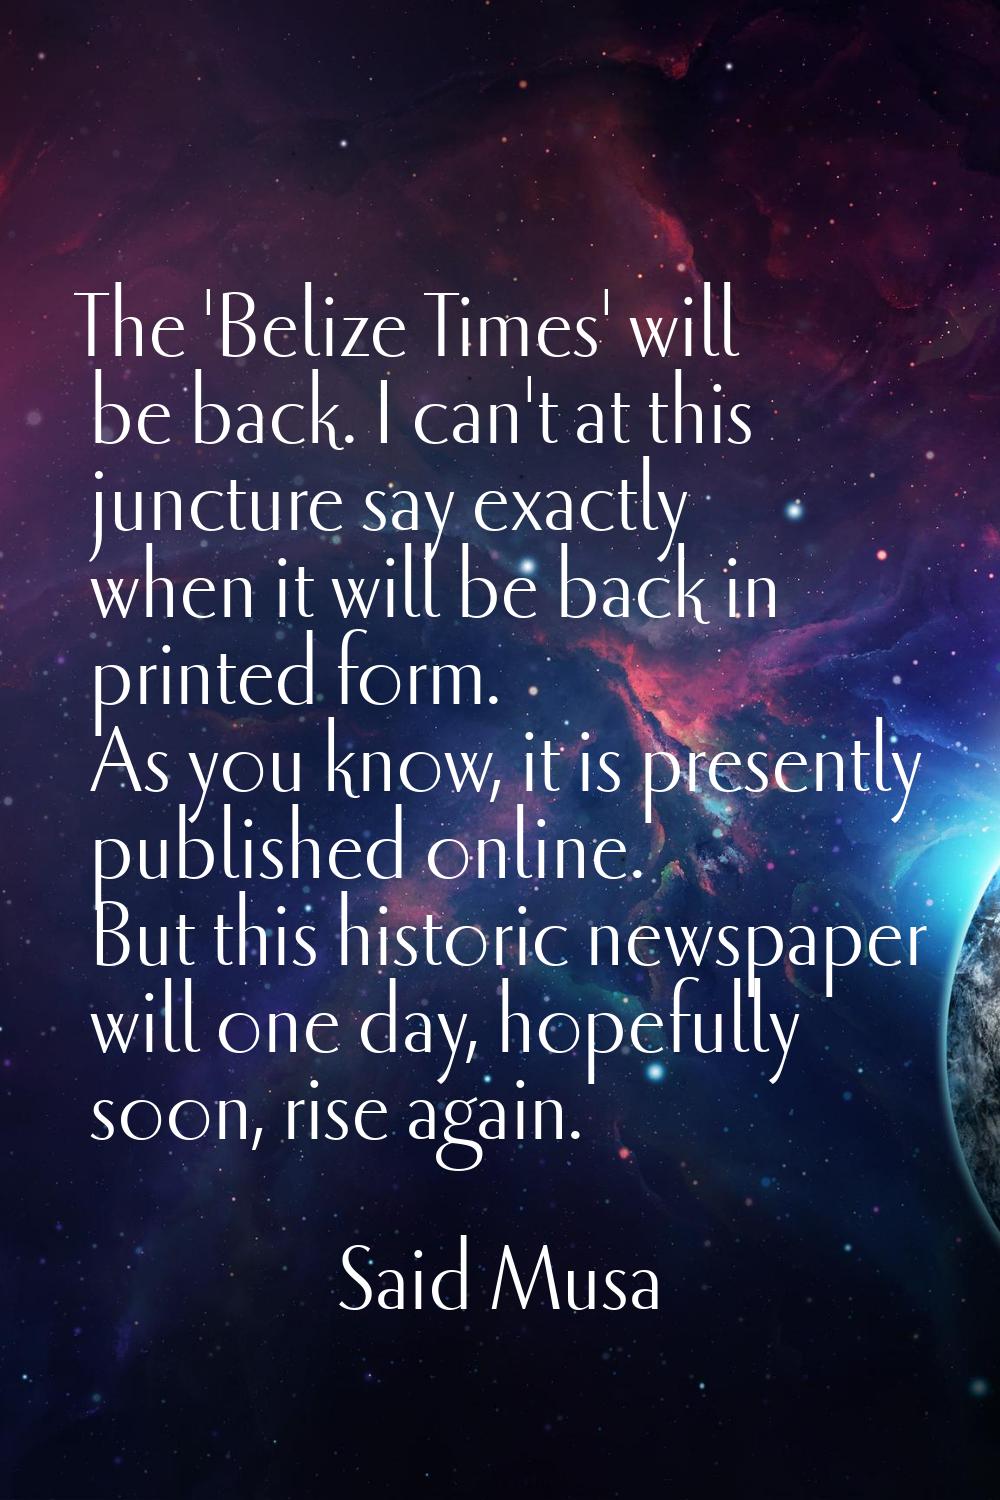 The 'Belize Times' will be back. I can't at this juncture say exactly when it will be back in print